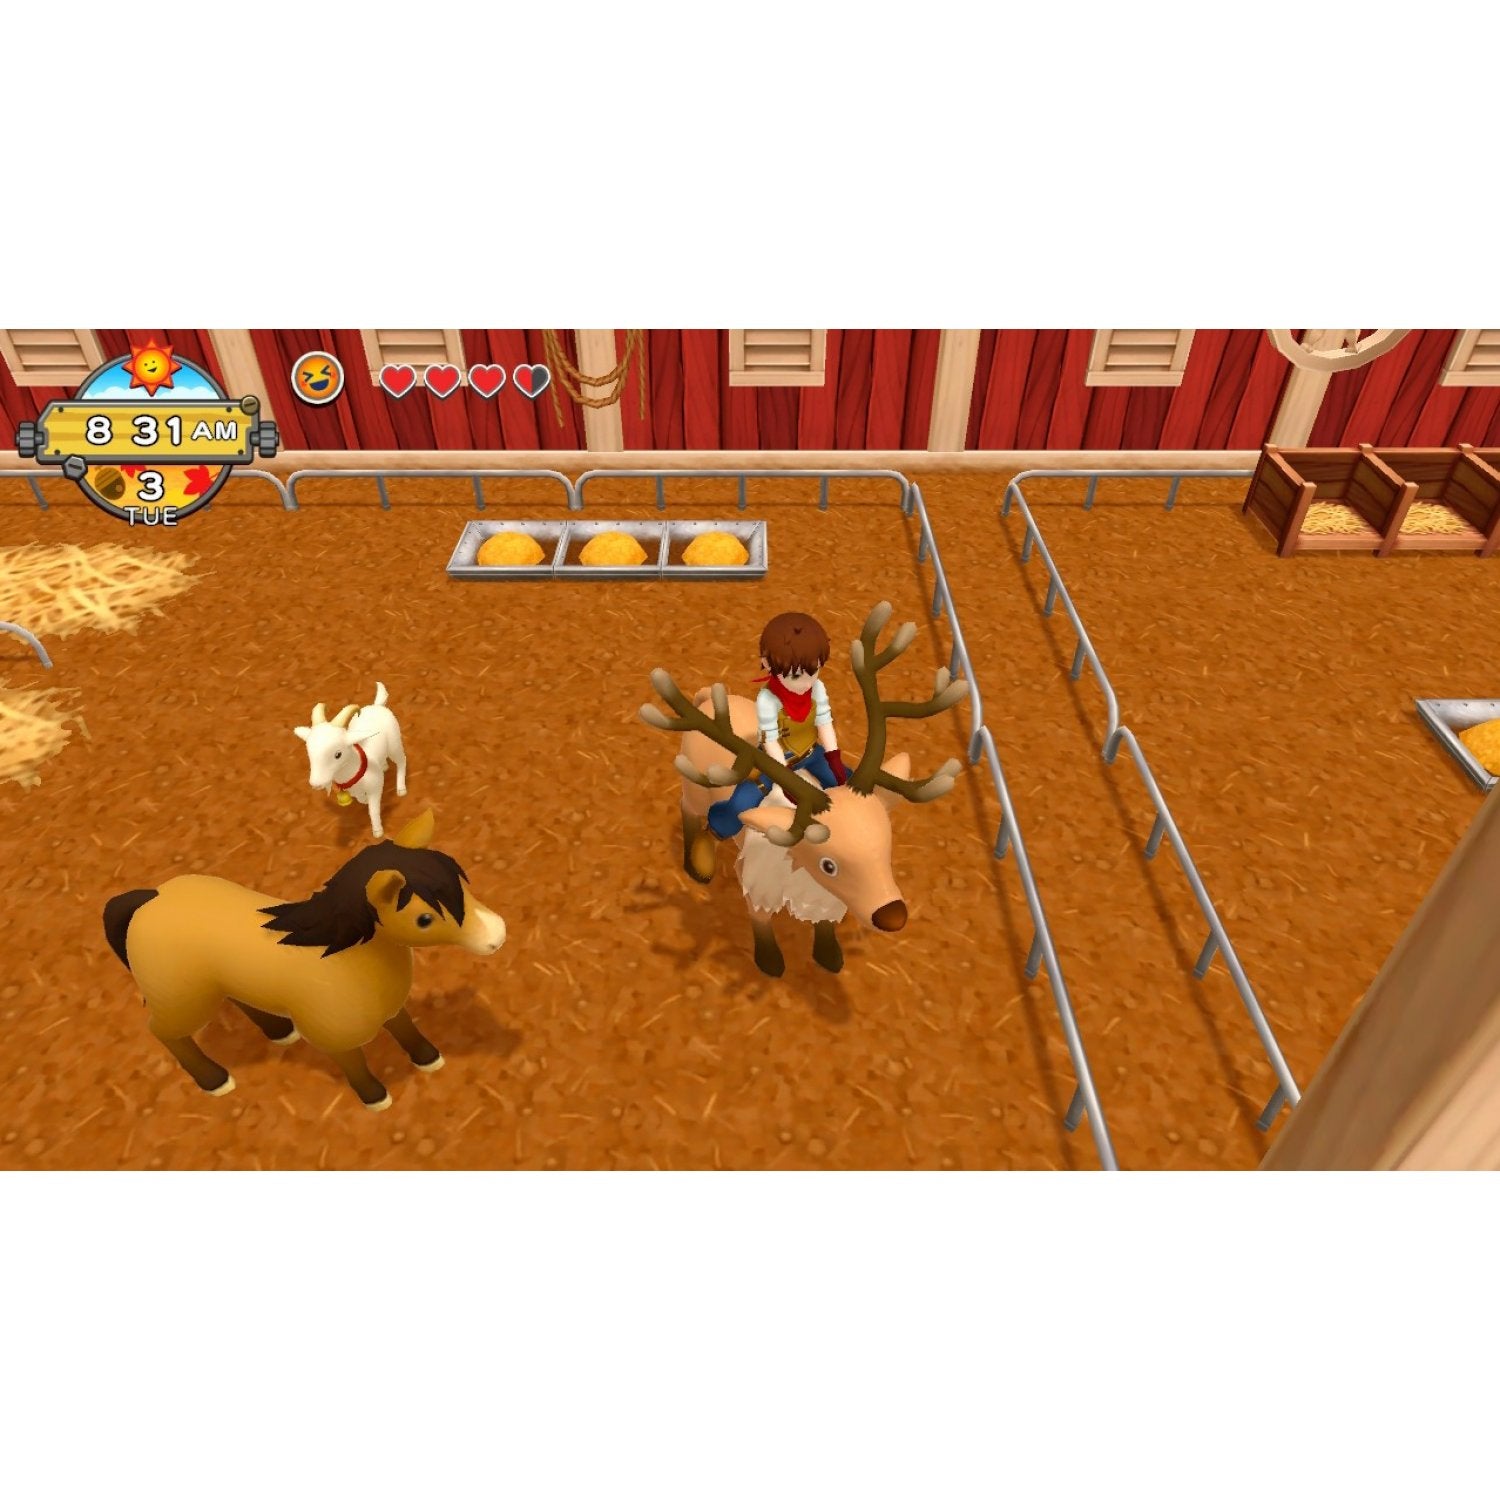 PS4 Harvest Moon: One World